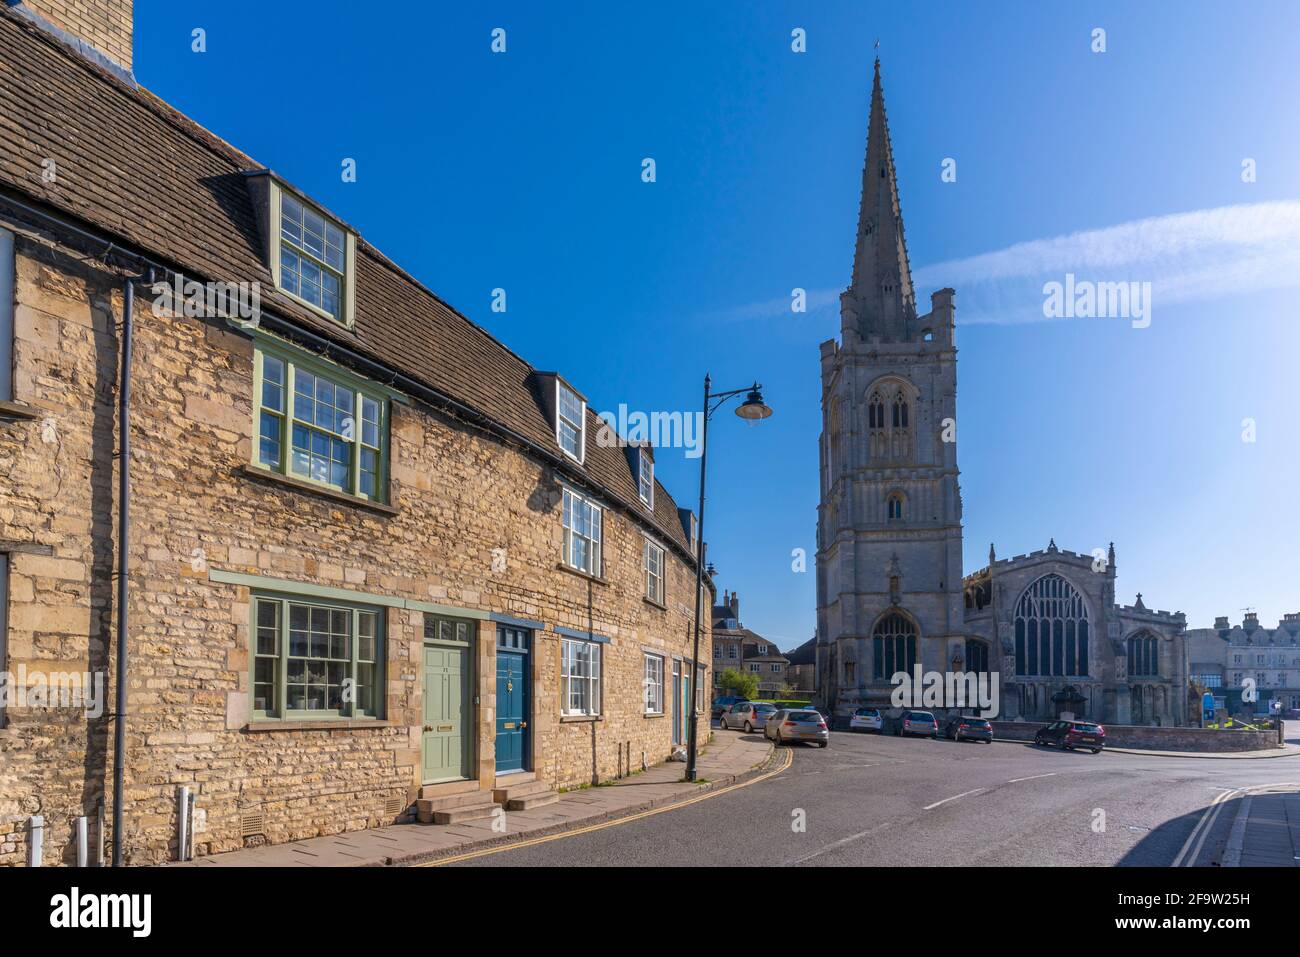 View of All Saints Church and cottages, Stamford, South Kesteven, Lincolnshire, England, United Kingdom, Europe Stock Photo